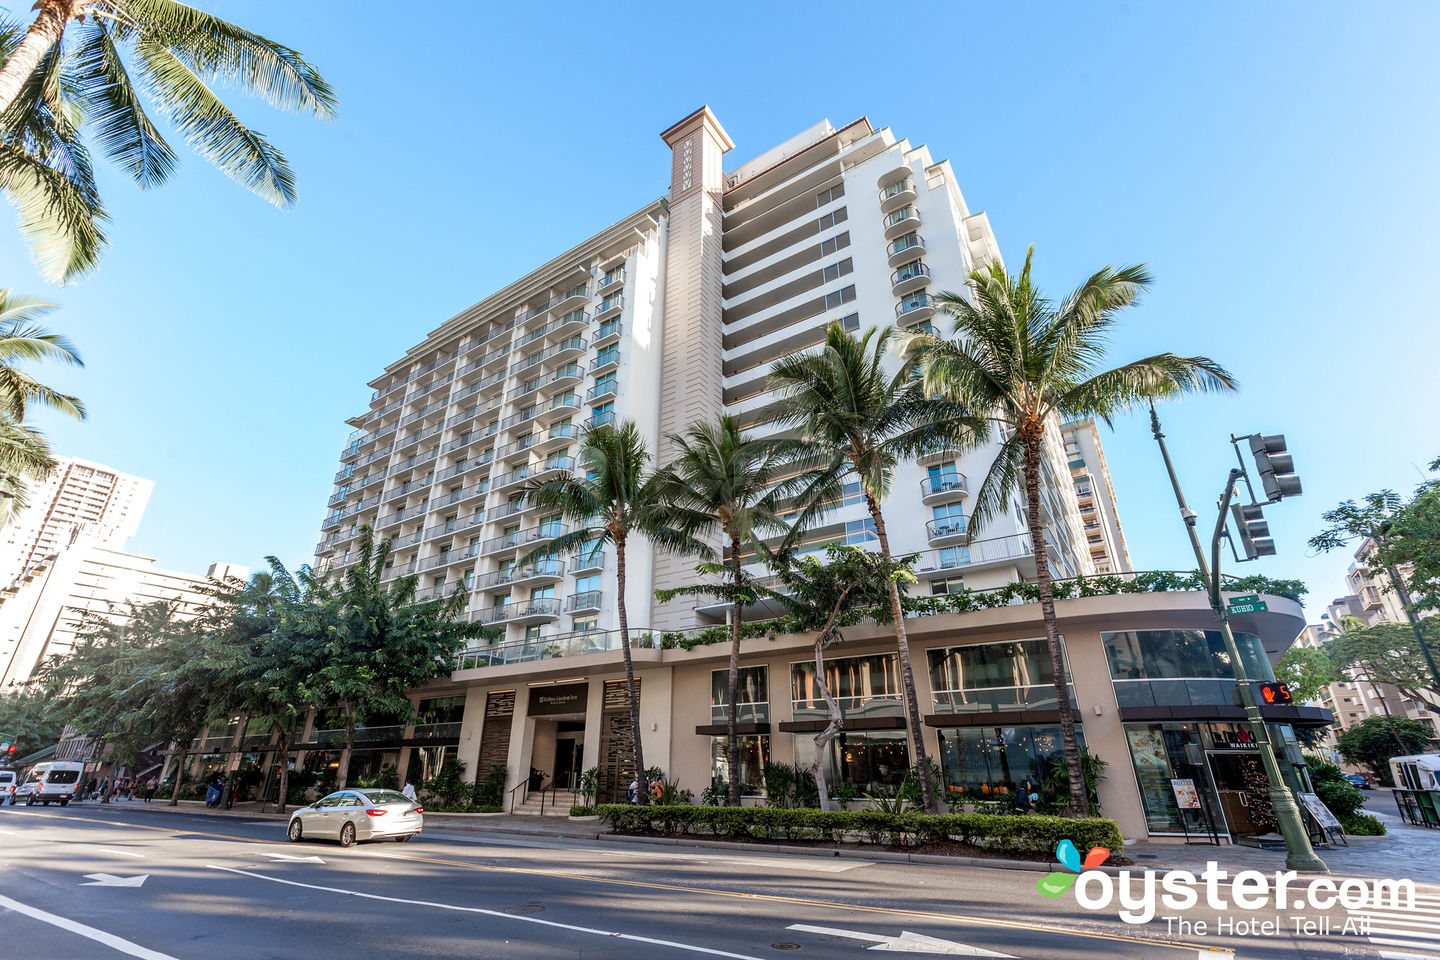 Hilton Garden Inn Waikiki Beach Review What To Really Expect If You Stay